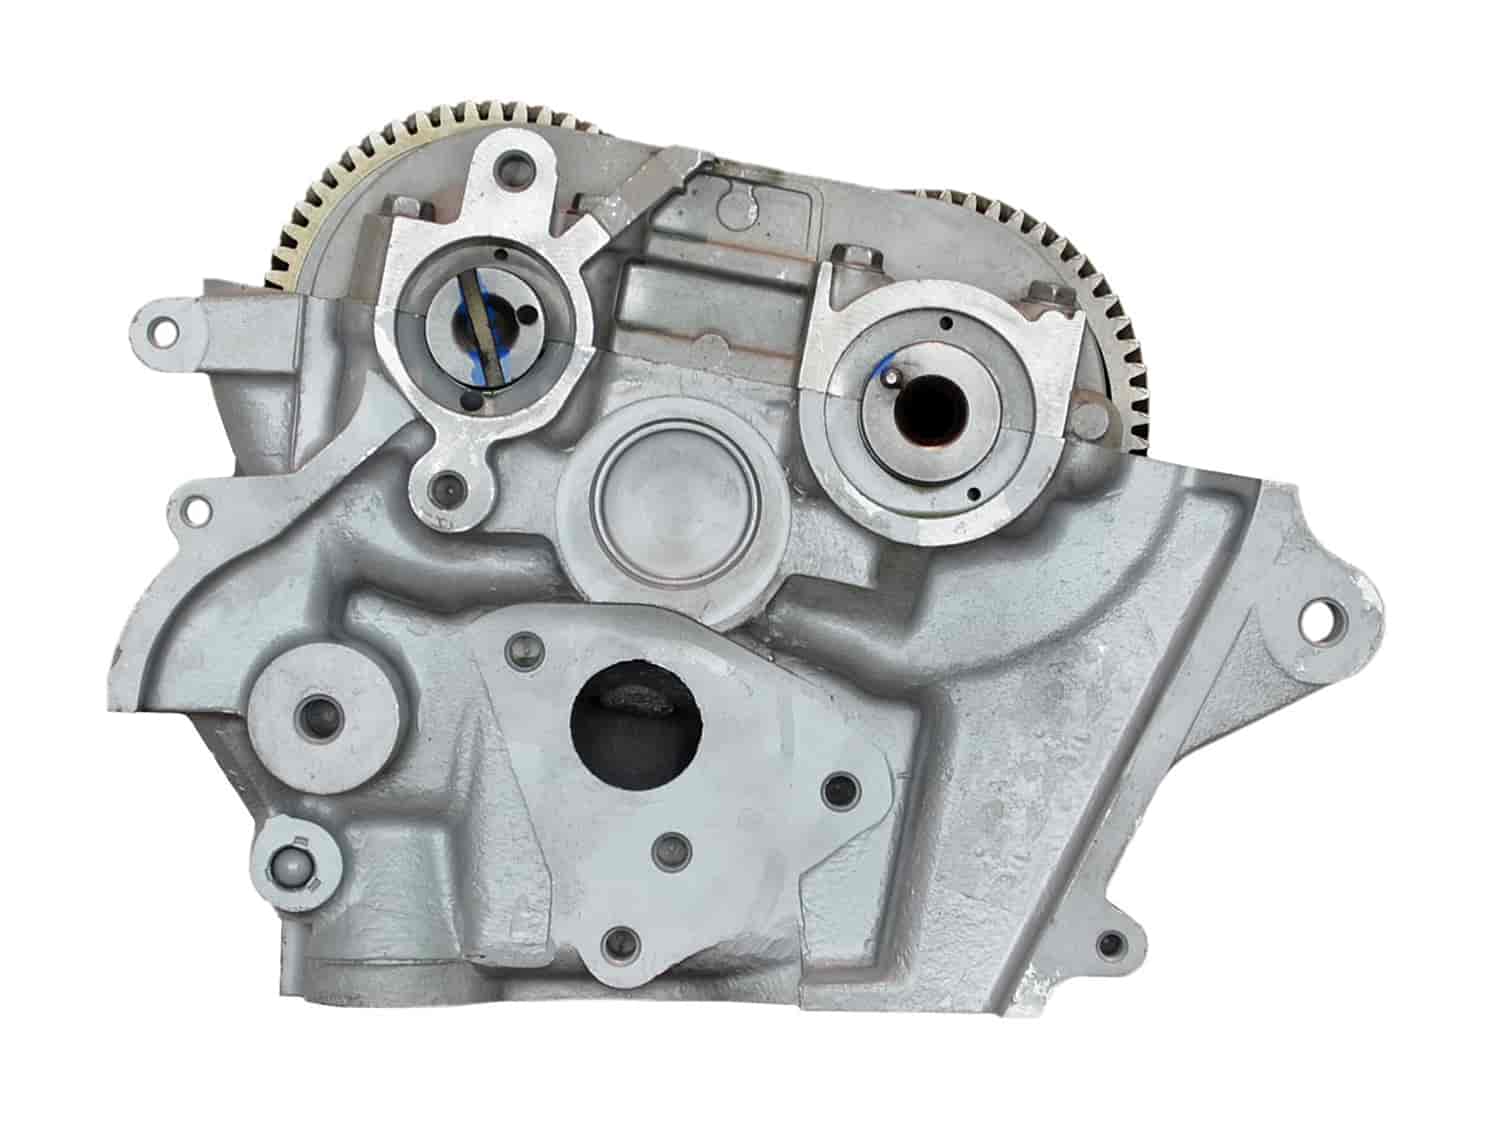 Remanufactured Cylinder Head for 1995-2002 Mazda Millenia with